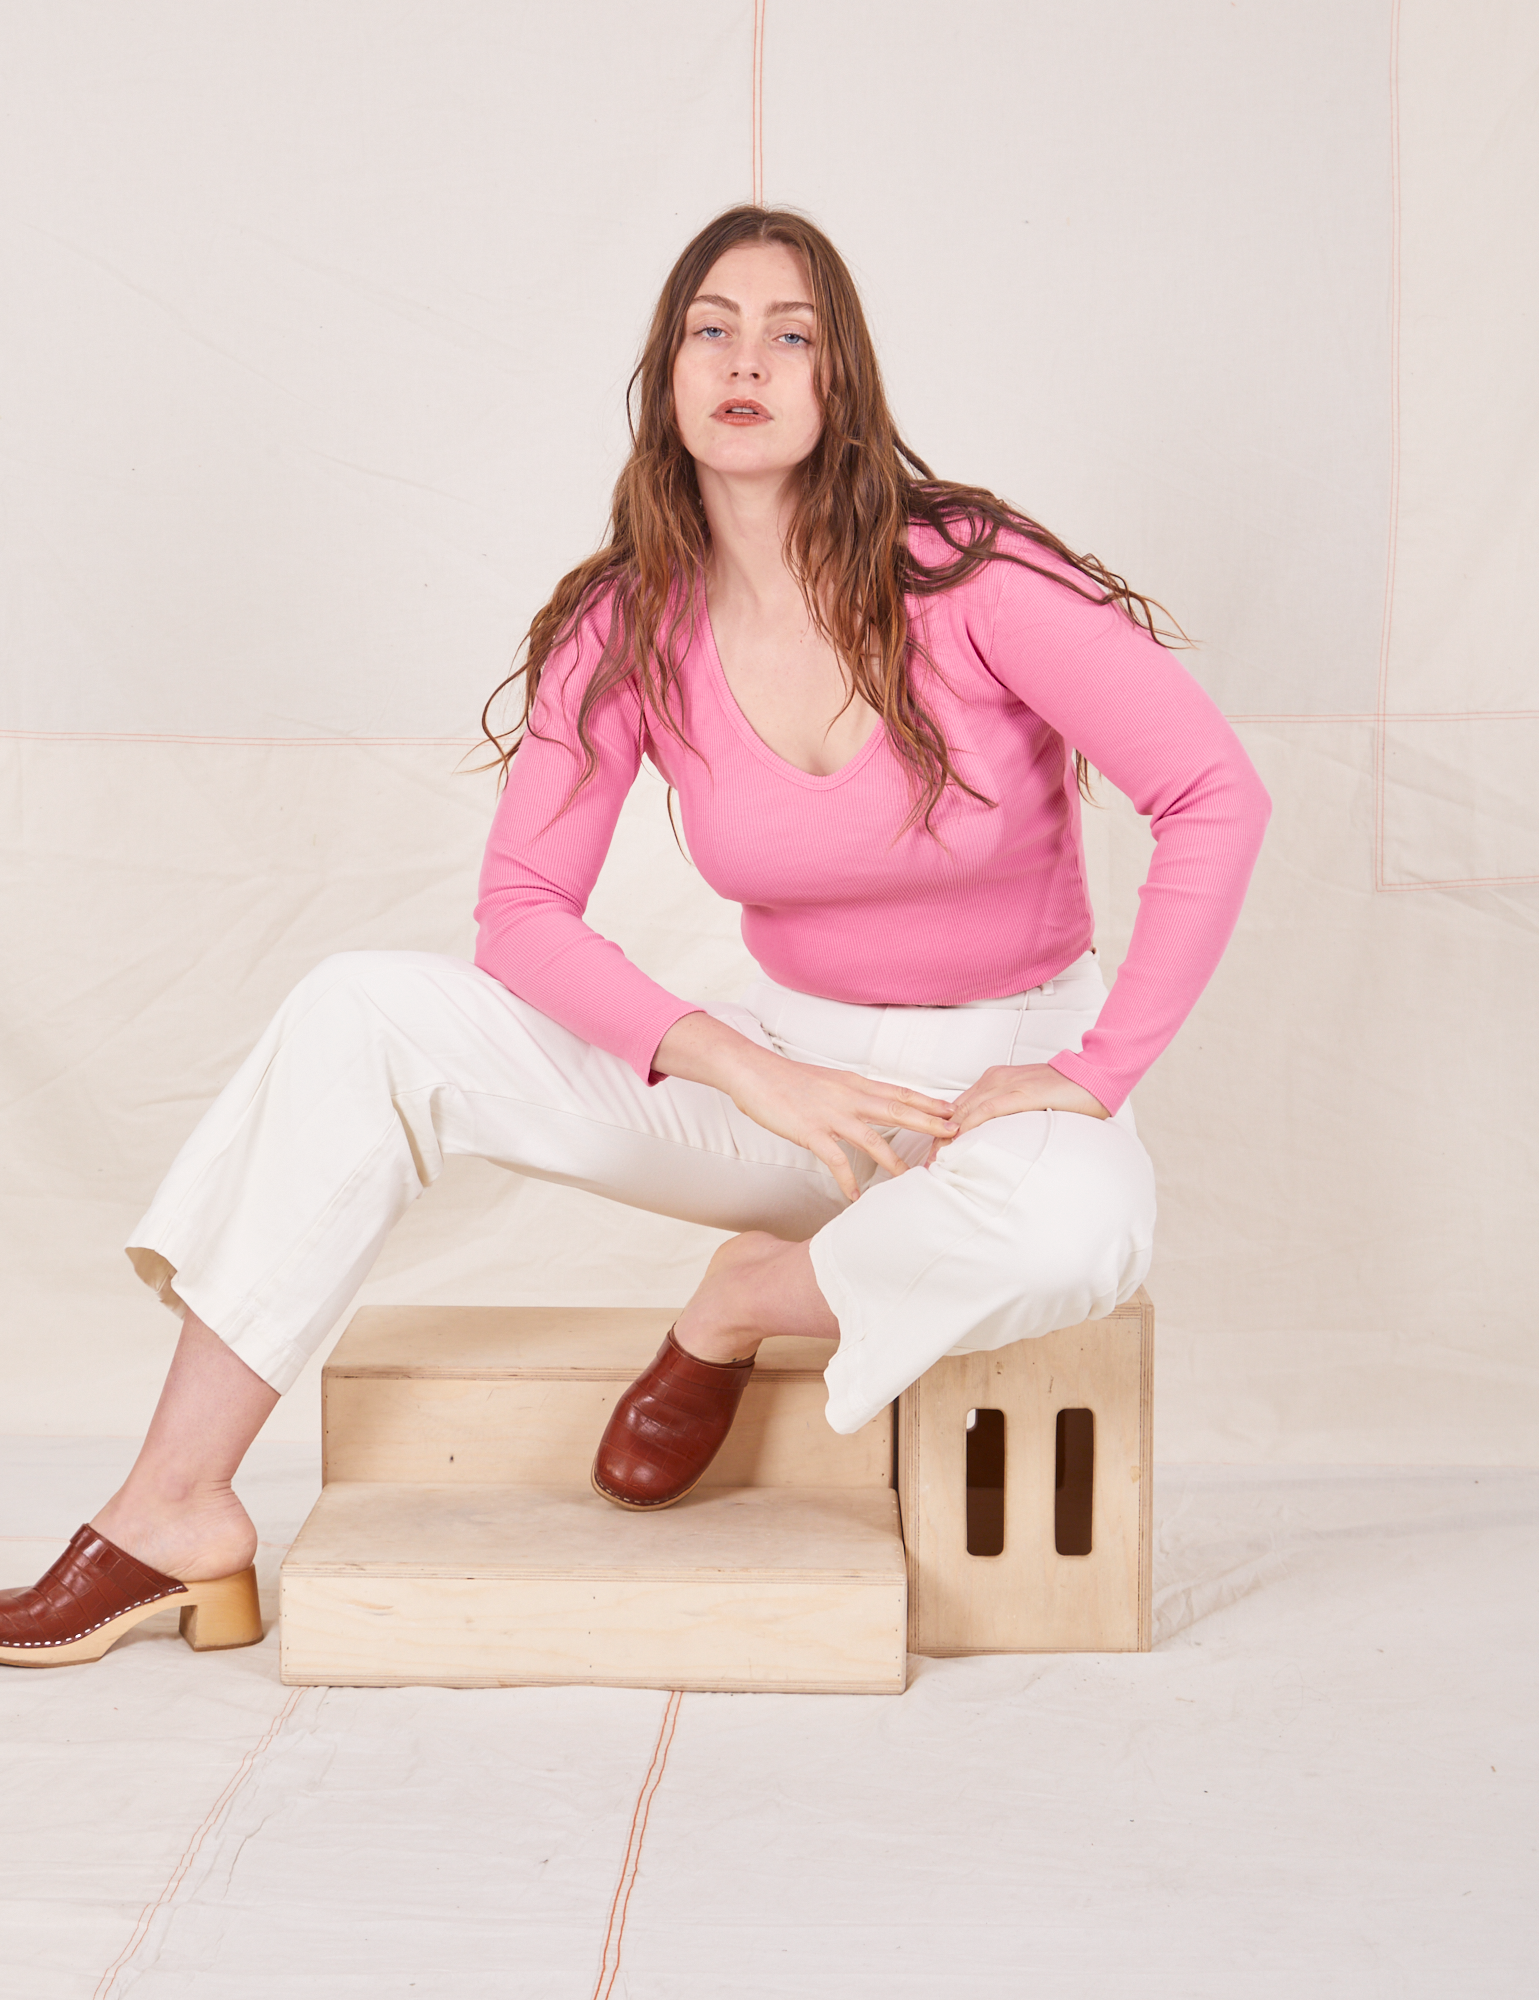 Allison is sitting on a wooden crate wearing Long Sleeve V-Neck Tee in Bubblegum Pink and vintage tee off-white Western Pants